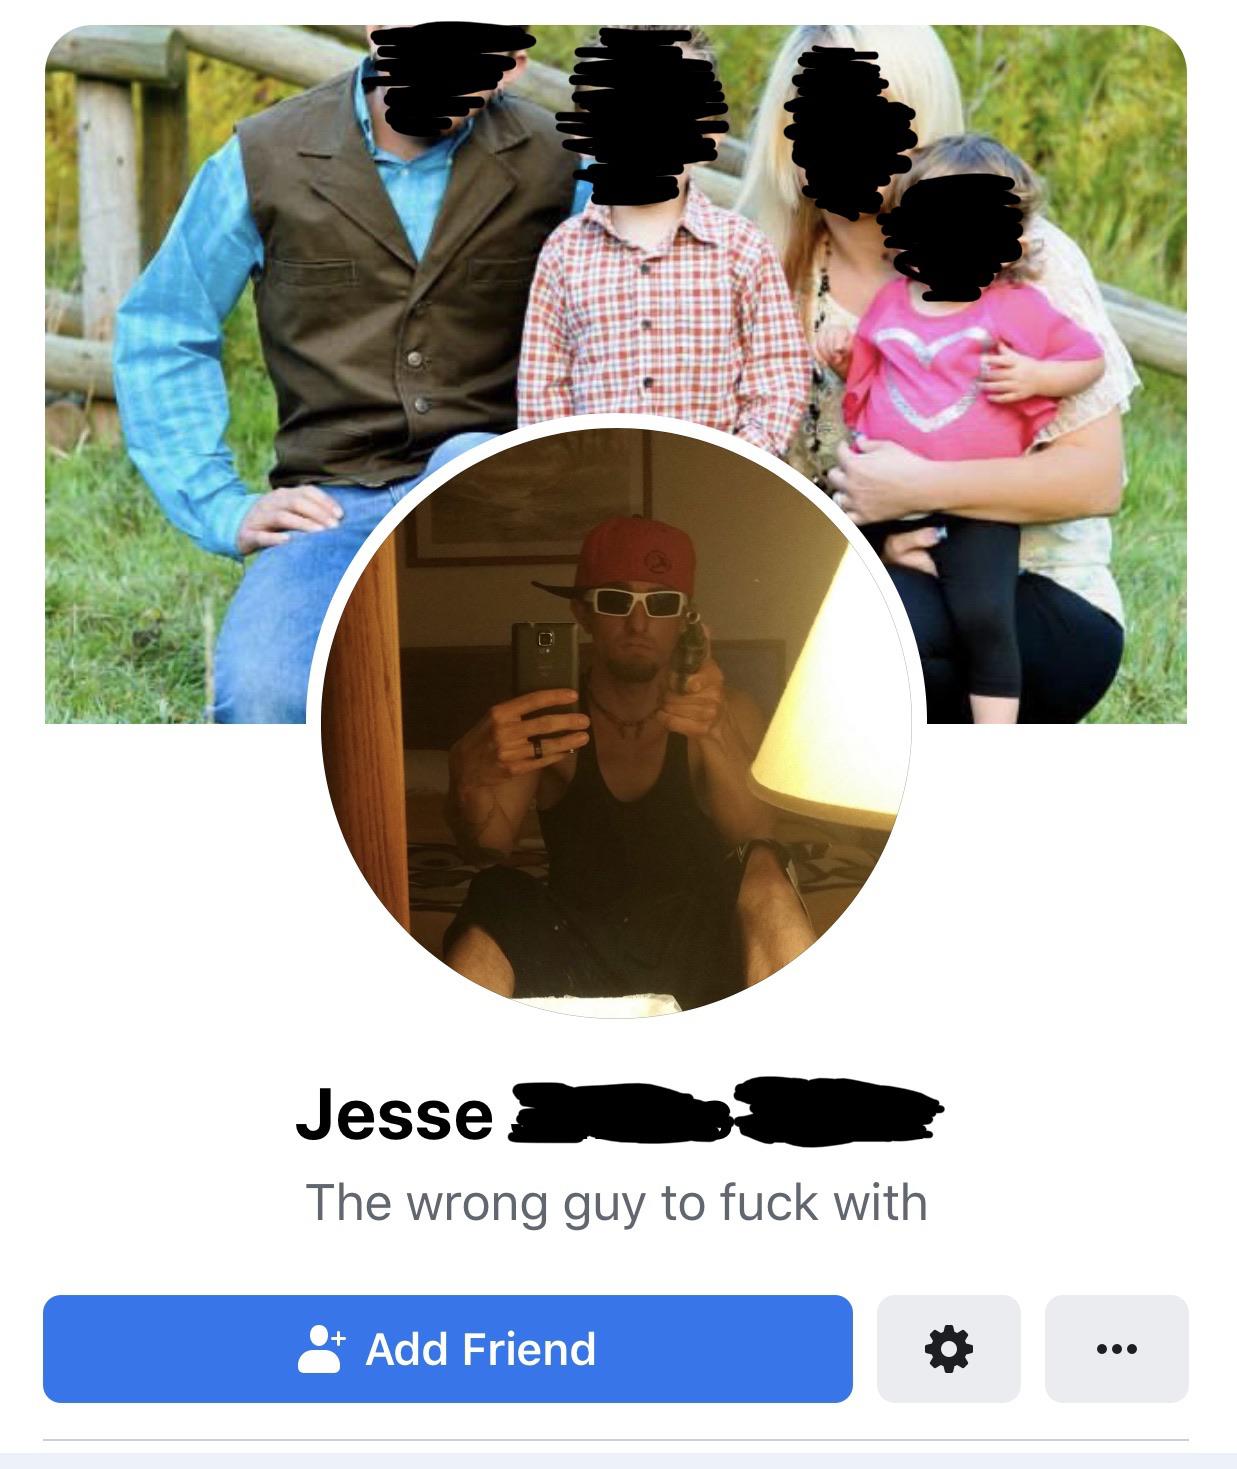 human behavior - Jesse The wrong guy to fuck with 8 Add Friend